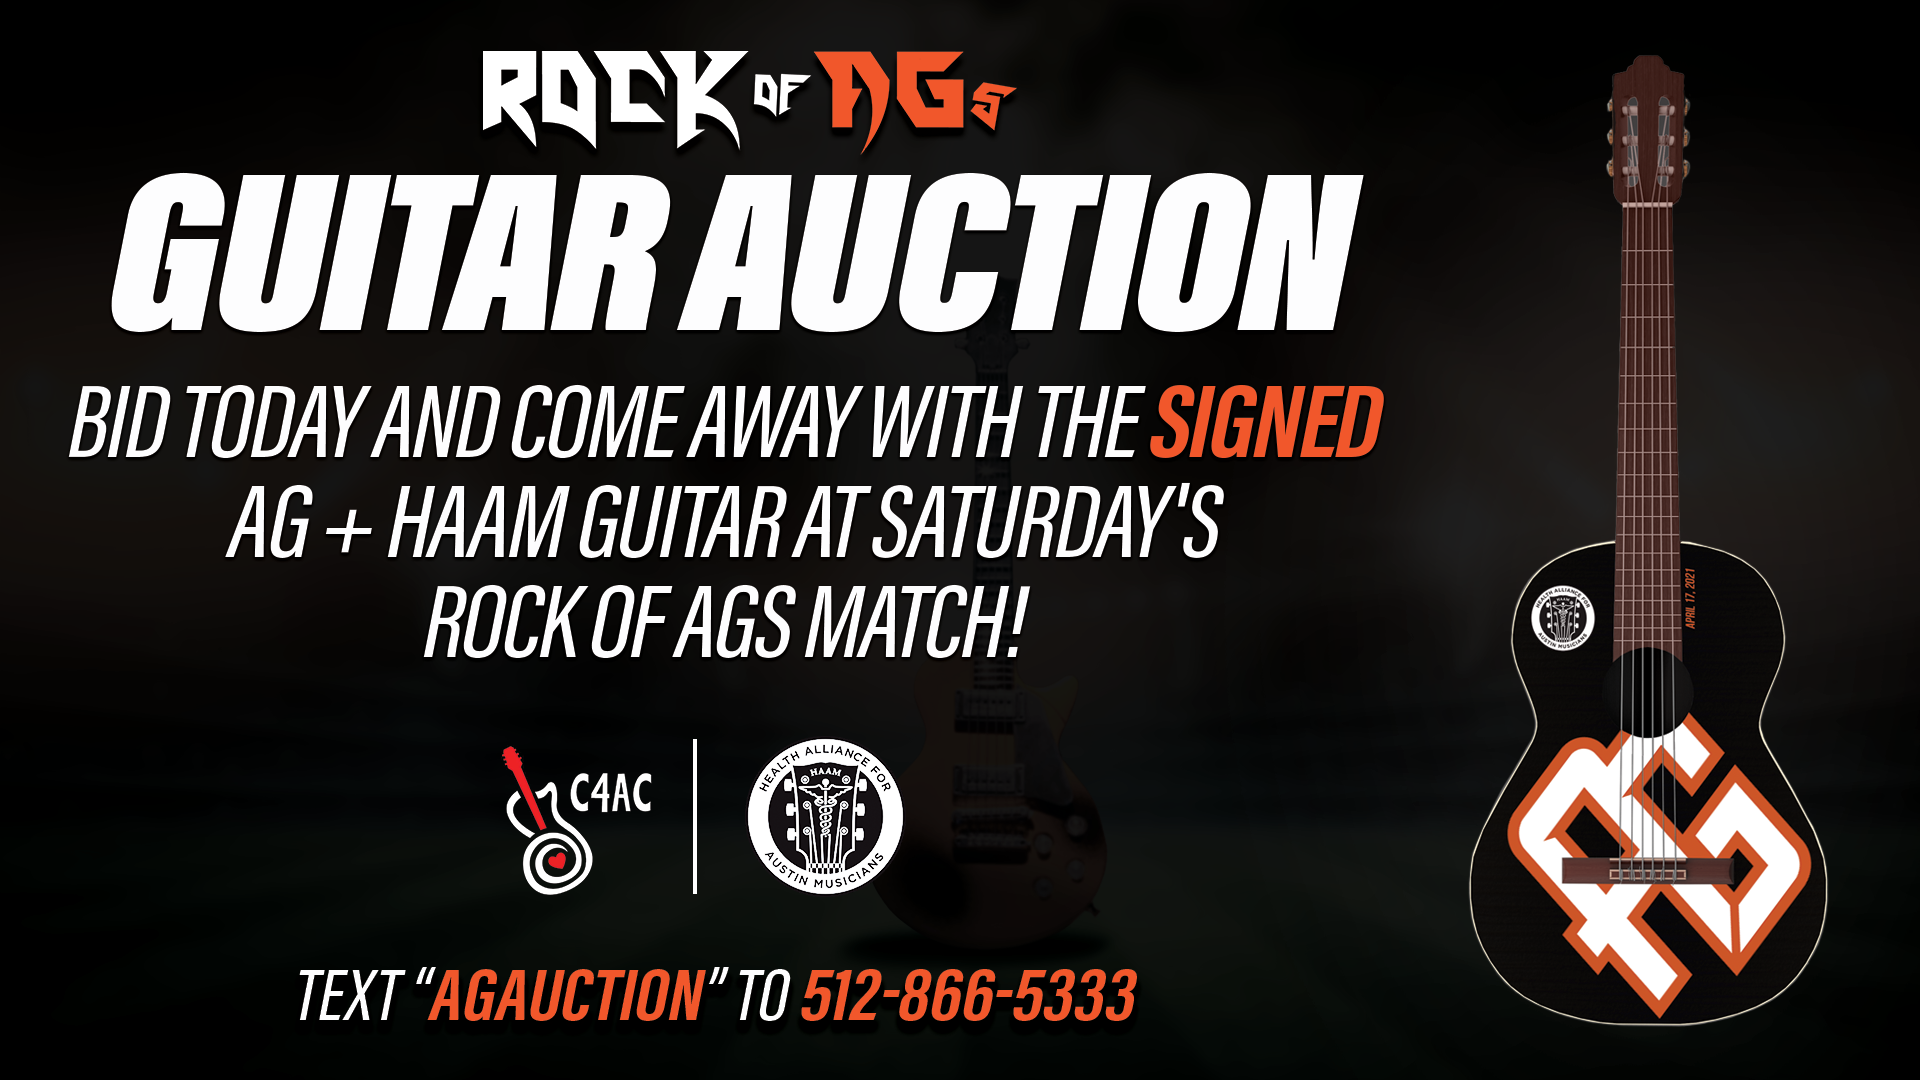 Rock of AGs Guitar Auction:  Bid on The AG + HAAM Guitar Now!